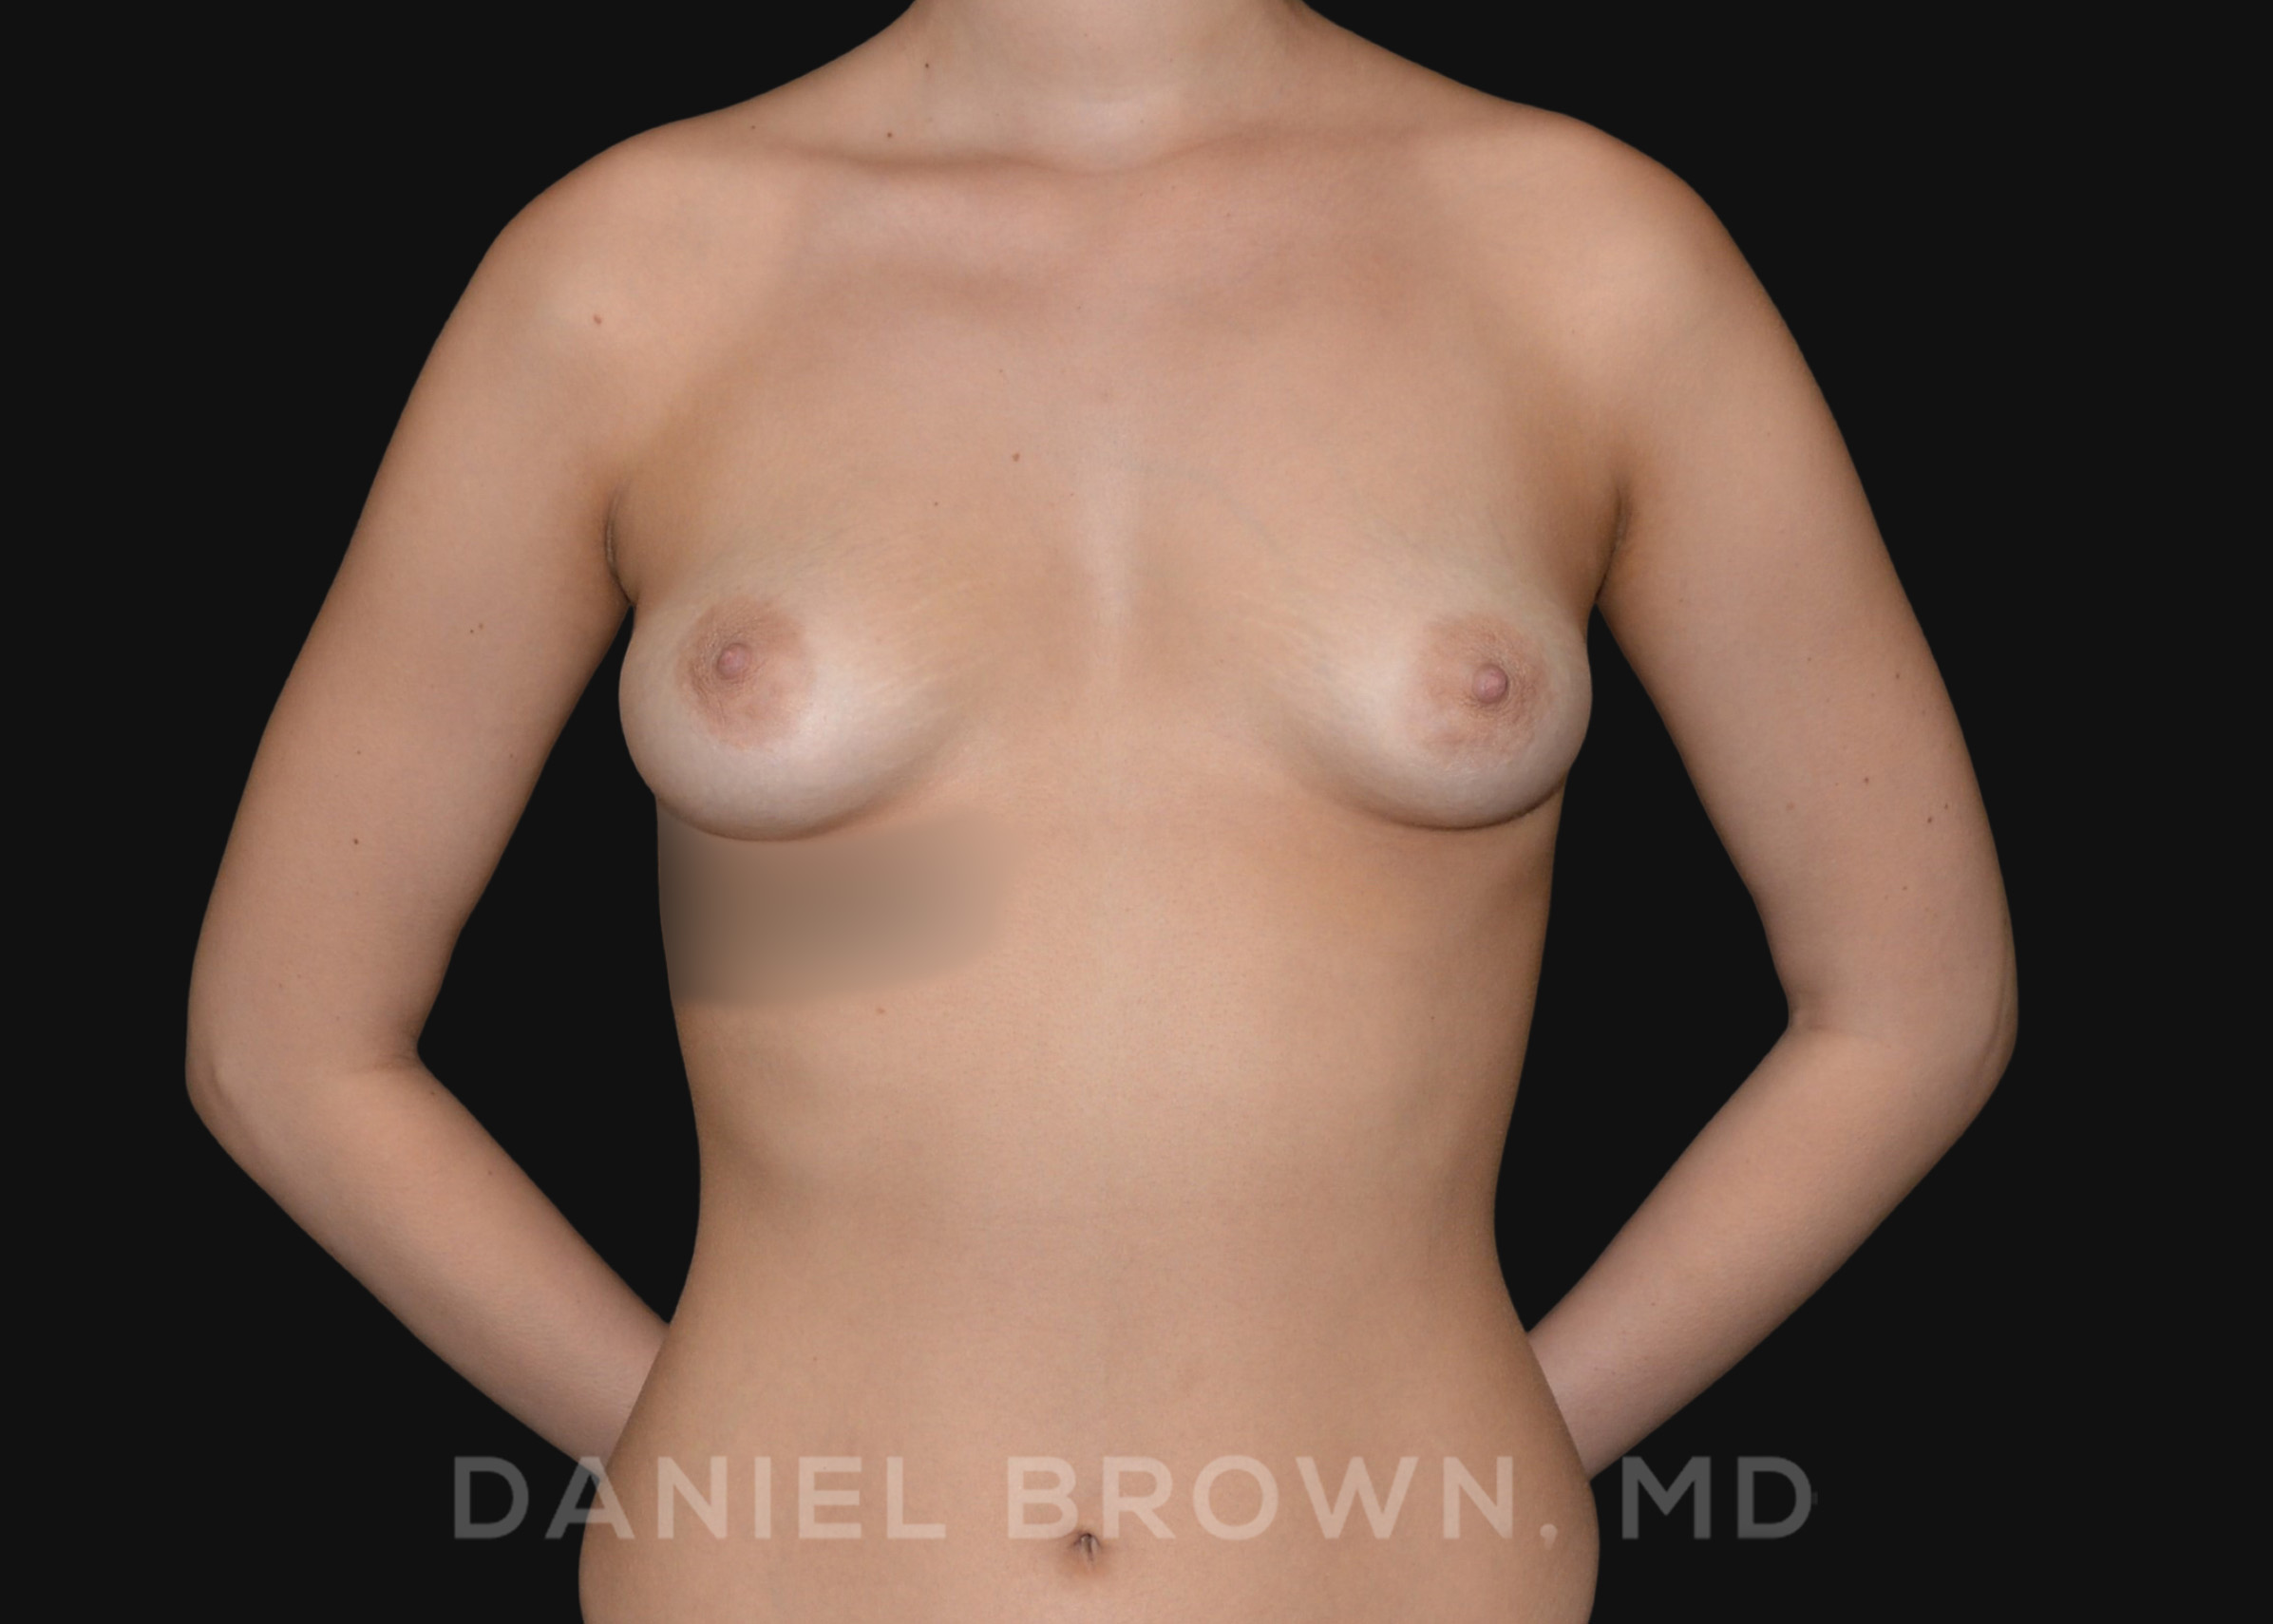 Breast Lift with Augmentation, Daniel Brown M.D